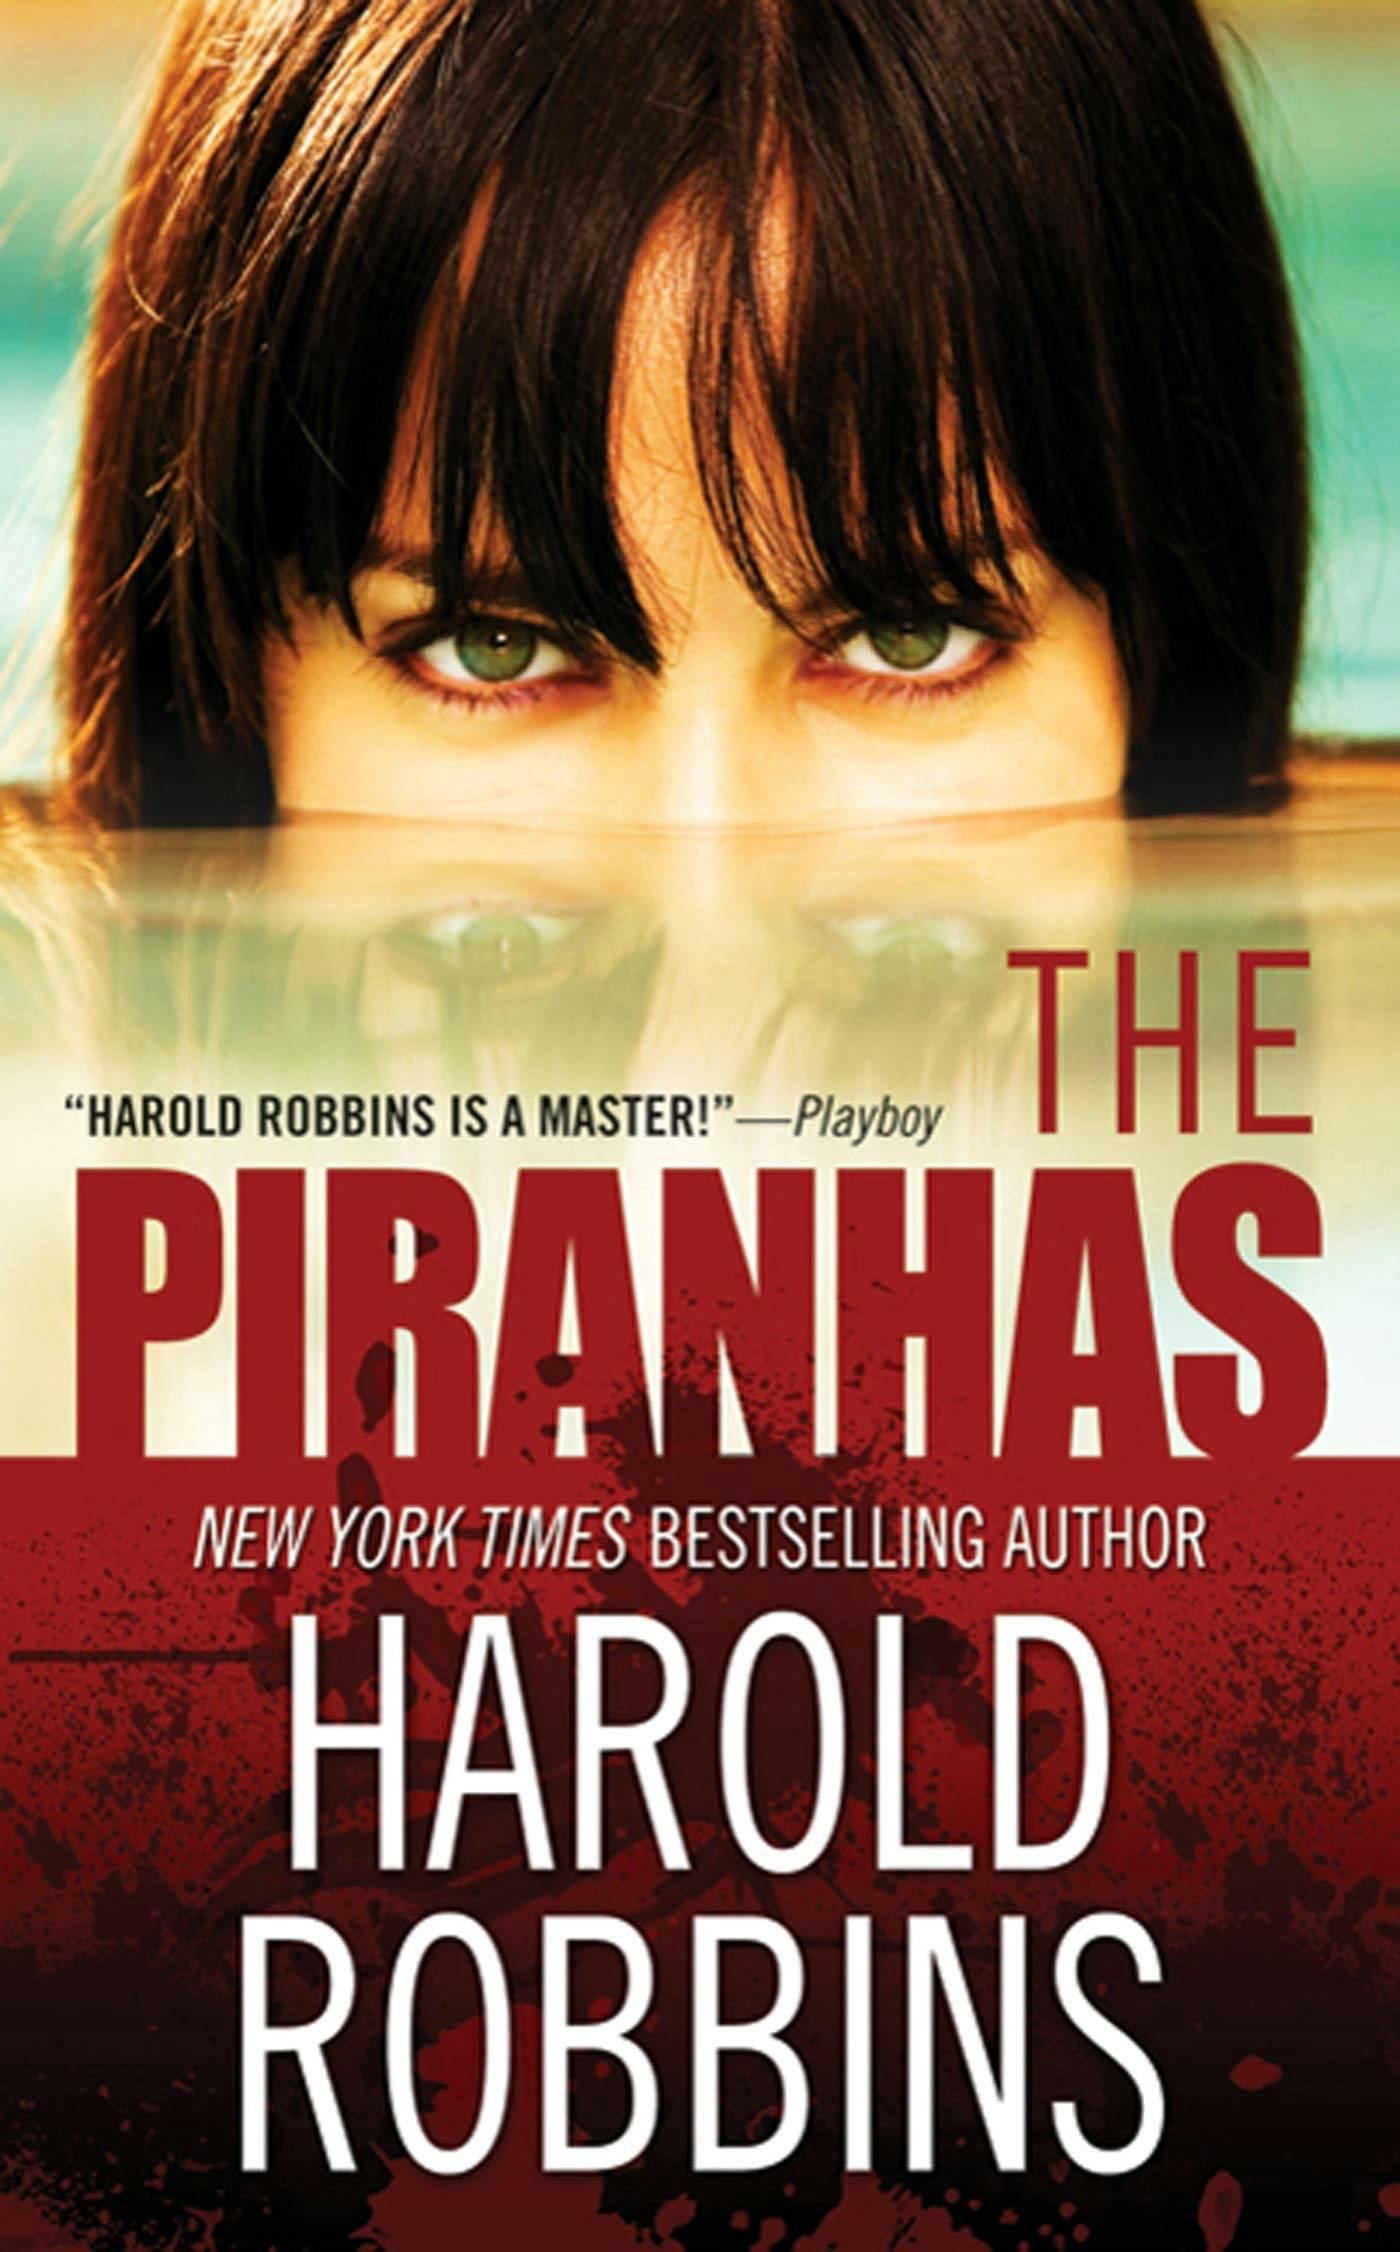 Cover for the book titled as: The Piranhas